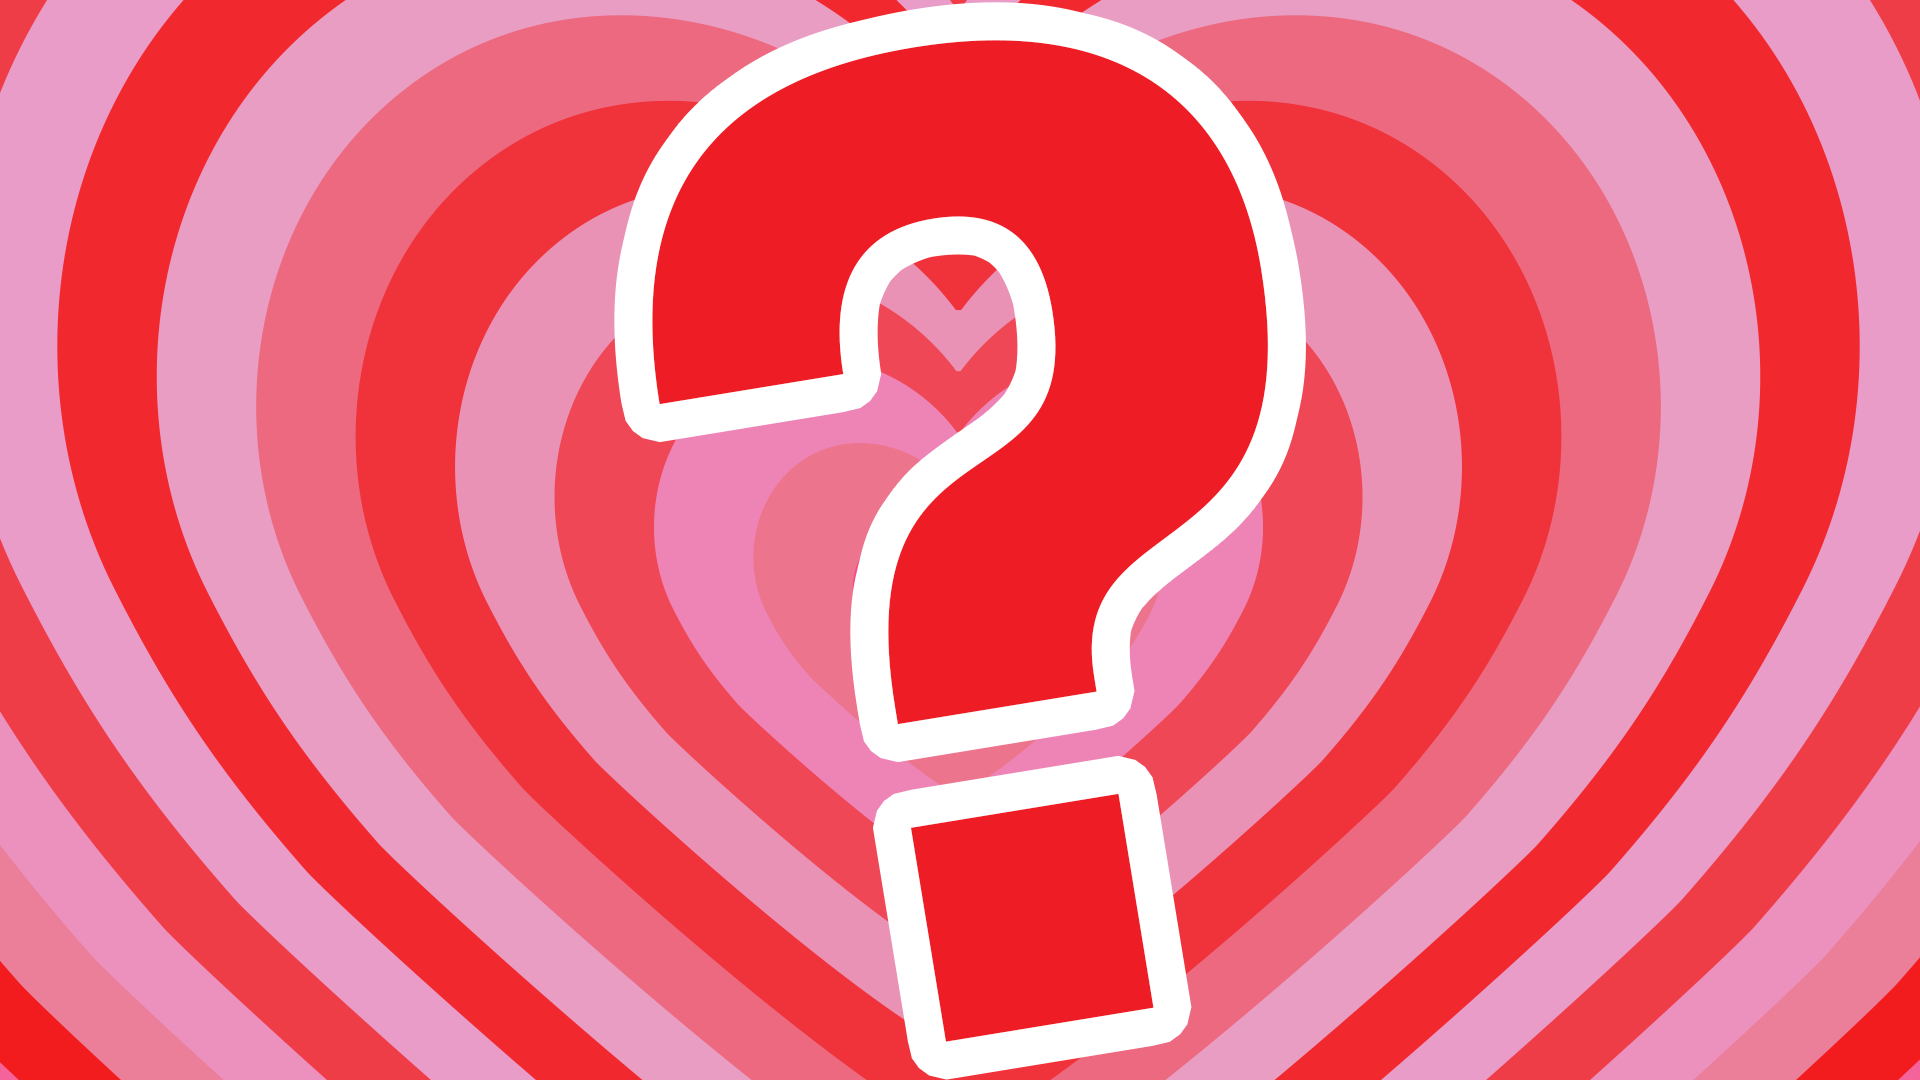 Heart background and question mark